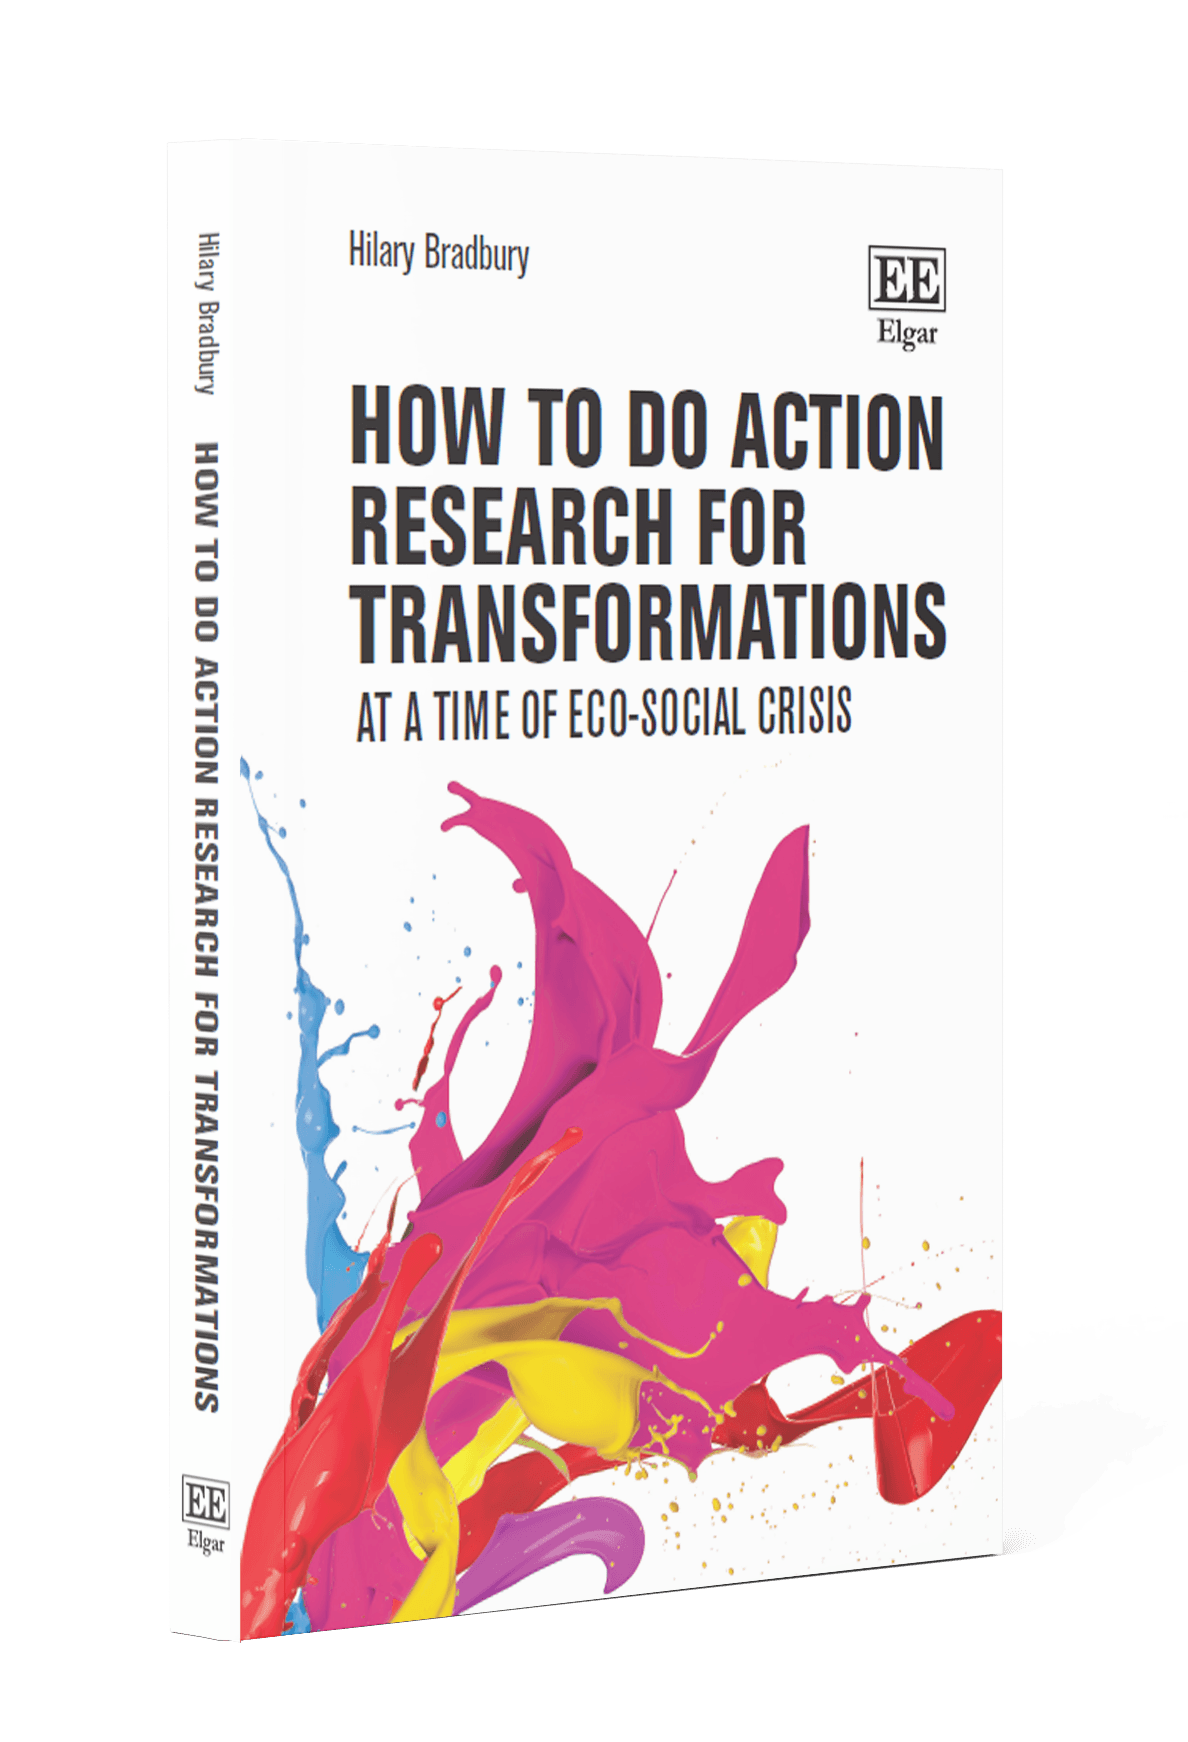 How-to-do-action-research-for-transformations-book-mockup